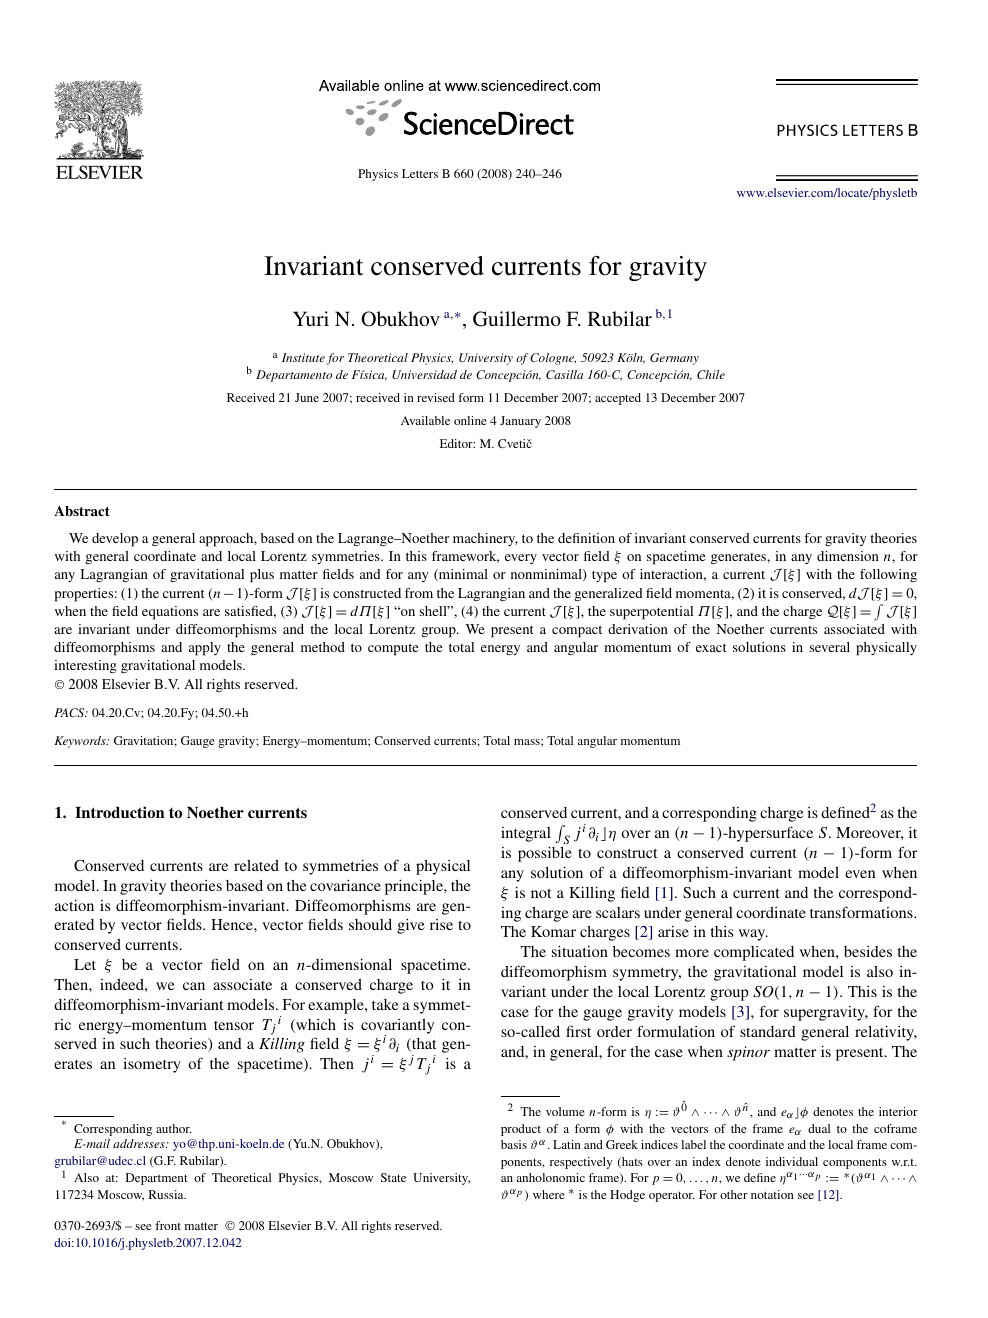 Invariant Conserved Currents For Gravity Topic Of Research Paper In Physical Sciences Download Scholarly Article Pdf And Read For Free On Cyberleninka Open Science Hub